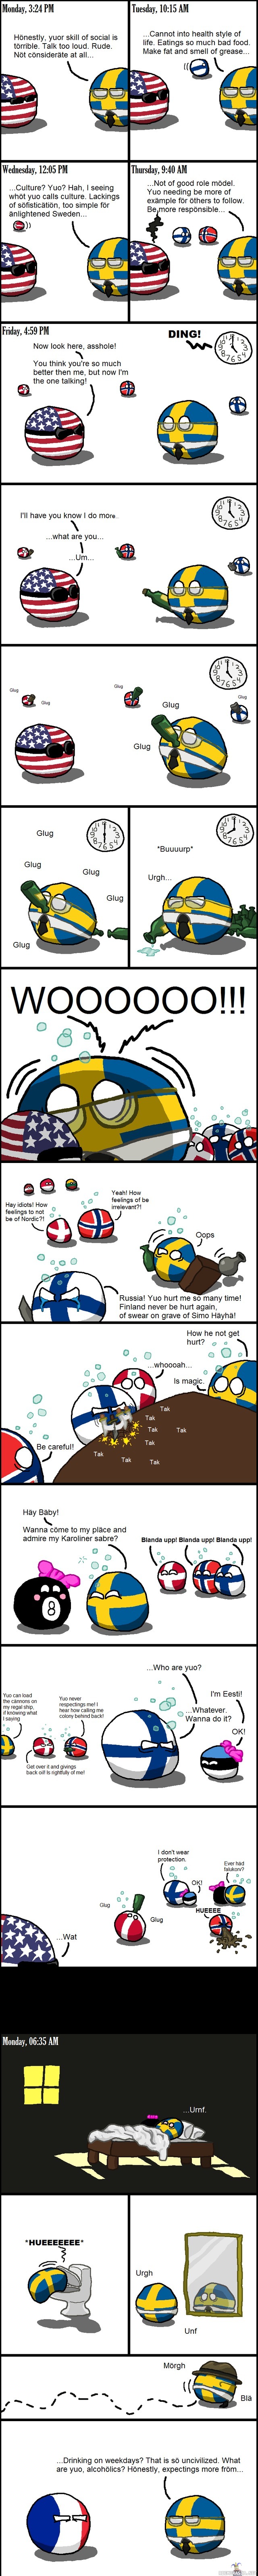 Nordics. Most civilised countries in Europe